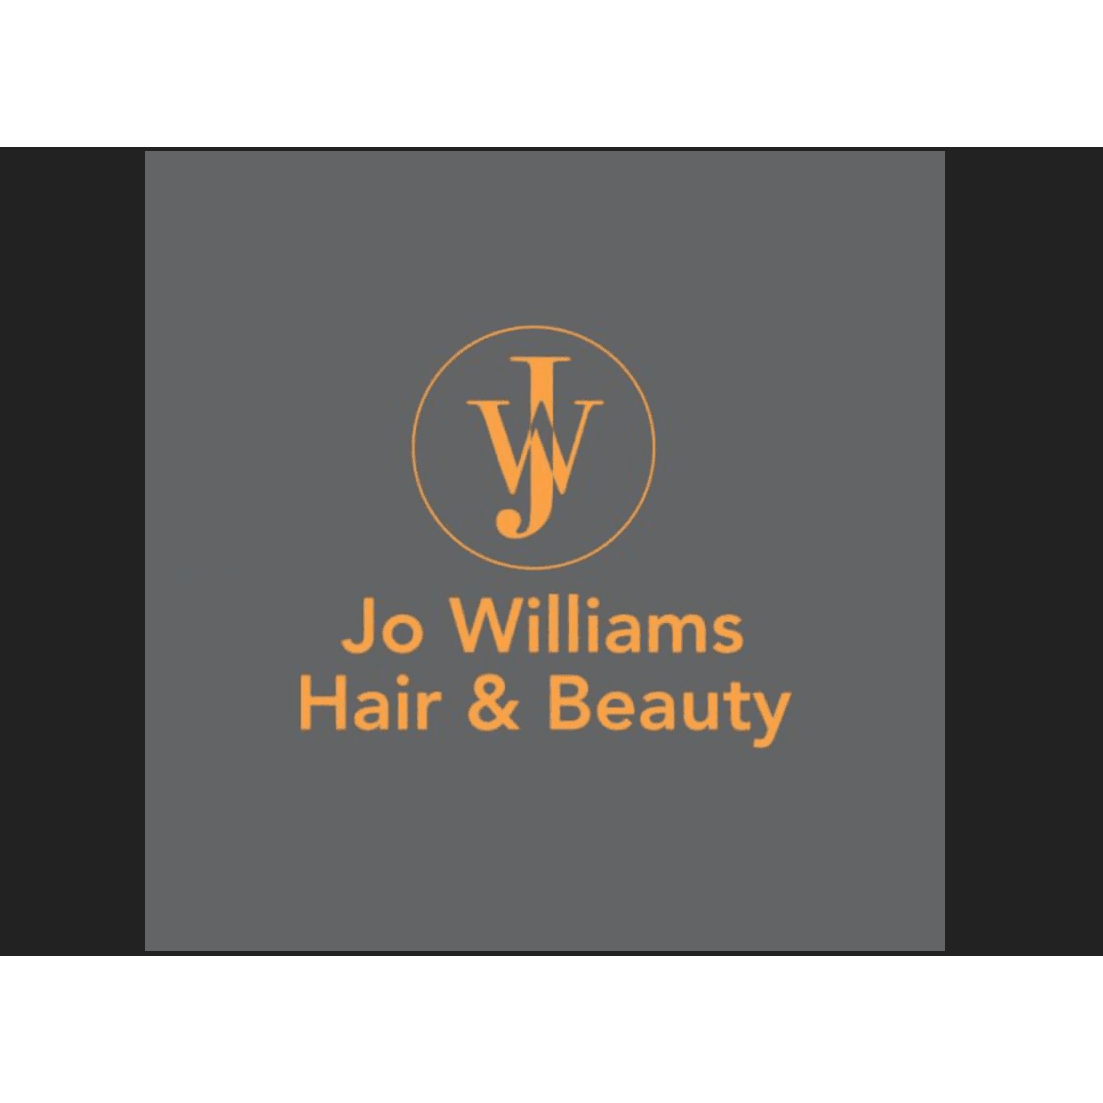 Jo Williams Hair and Beauty - London, London SE3 9EX - 020 8319 3247 | ShowMeLocal.com